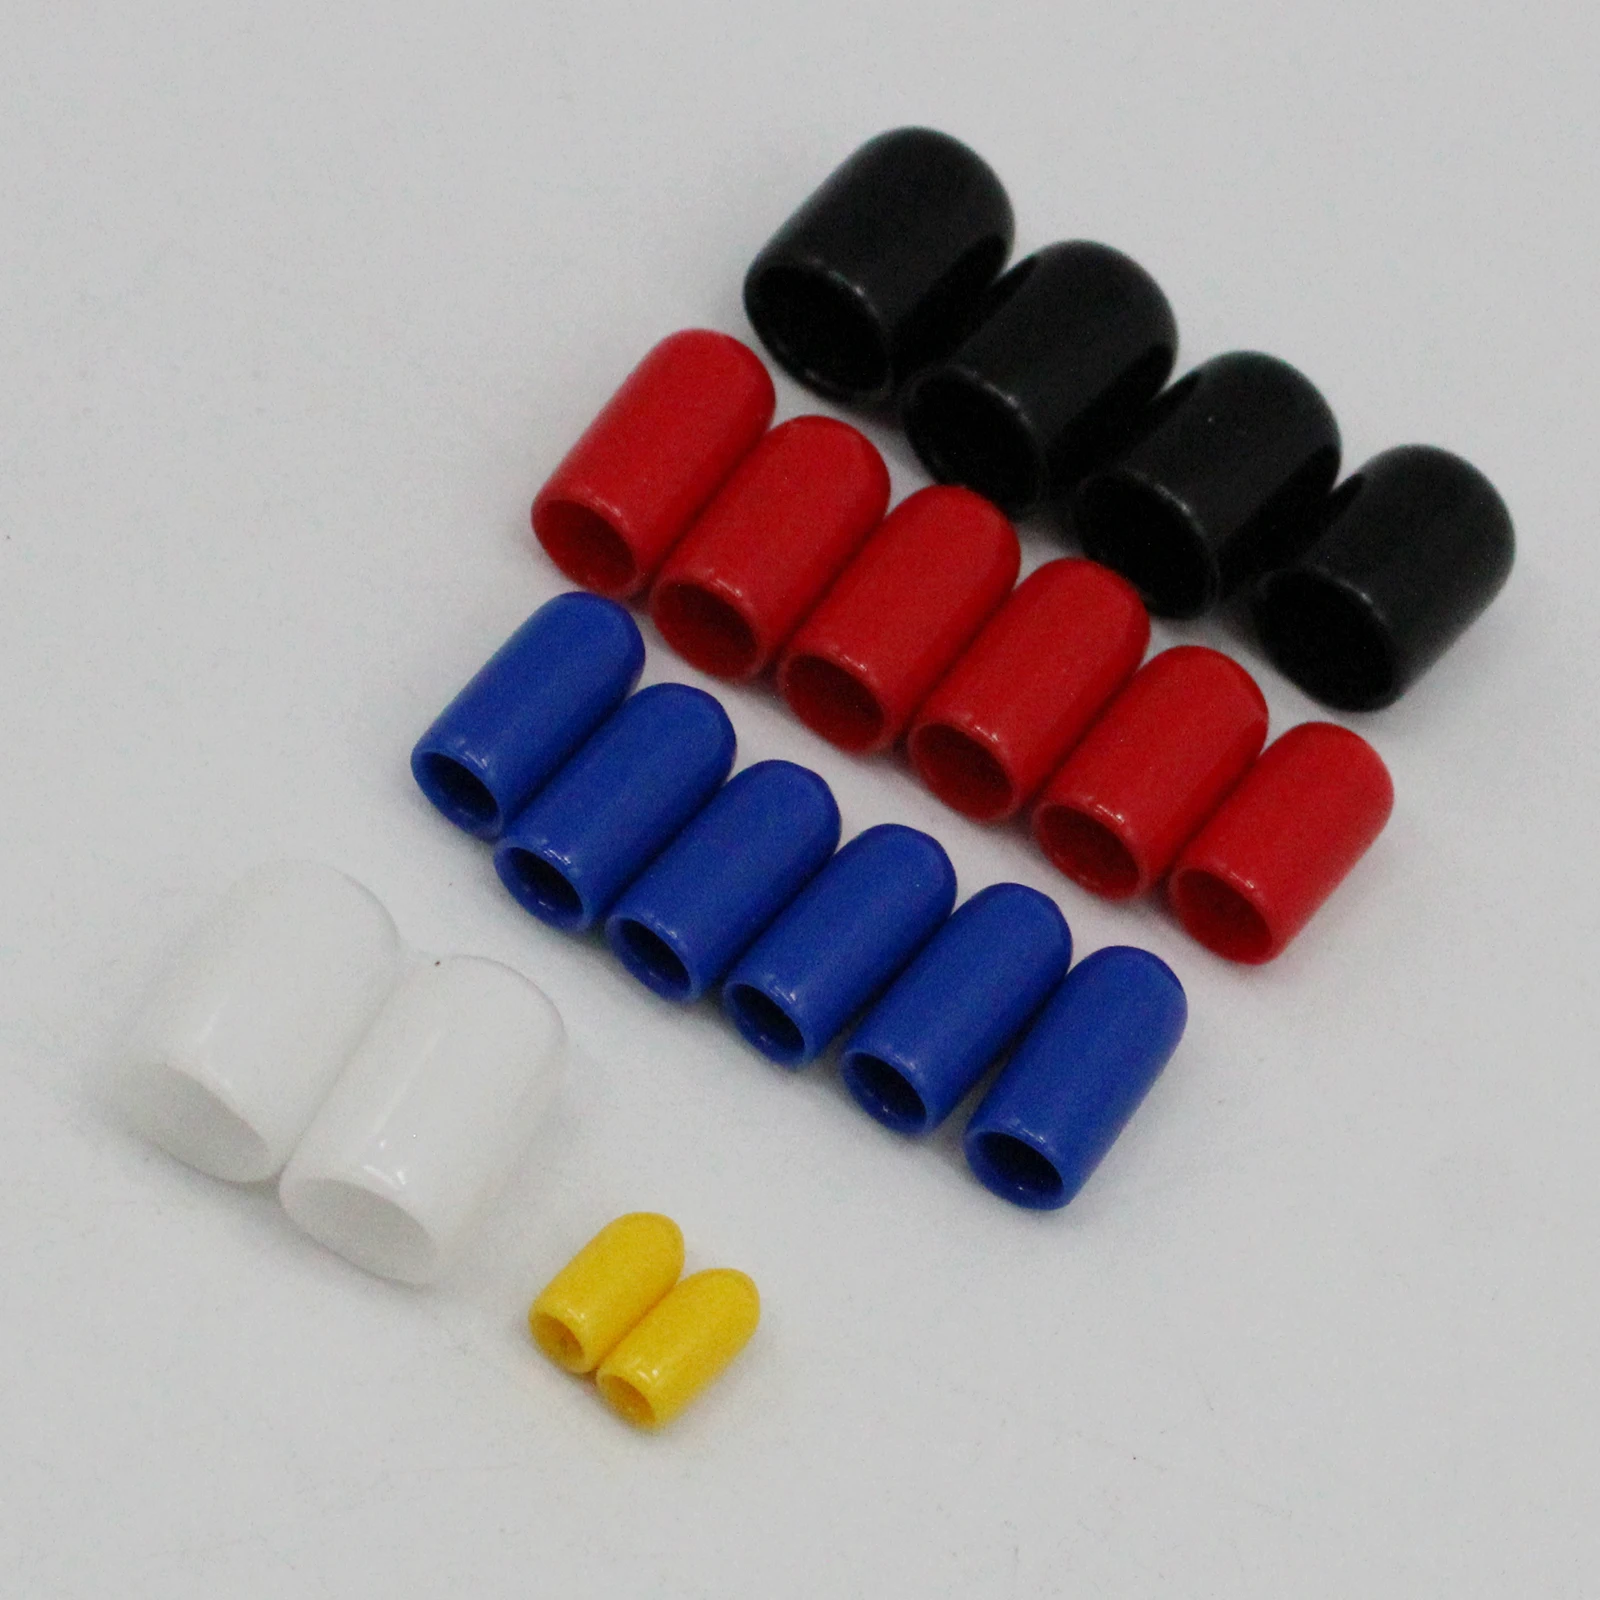 20pcs PVC Vacuum Cap Assortment 1/8in 3/16in 1/4in 3/8in 5/16in Set Kit For Chevy Car Accessories Hoses & Clamps